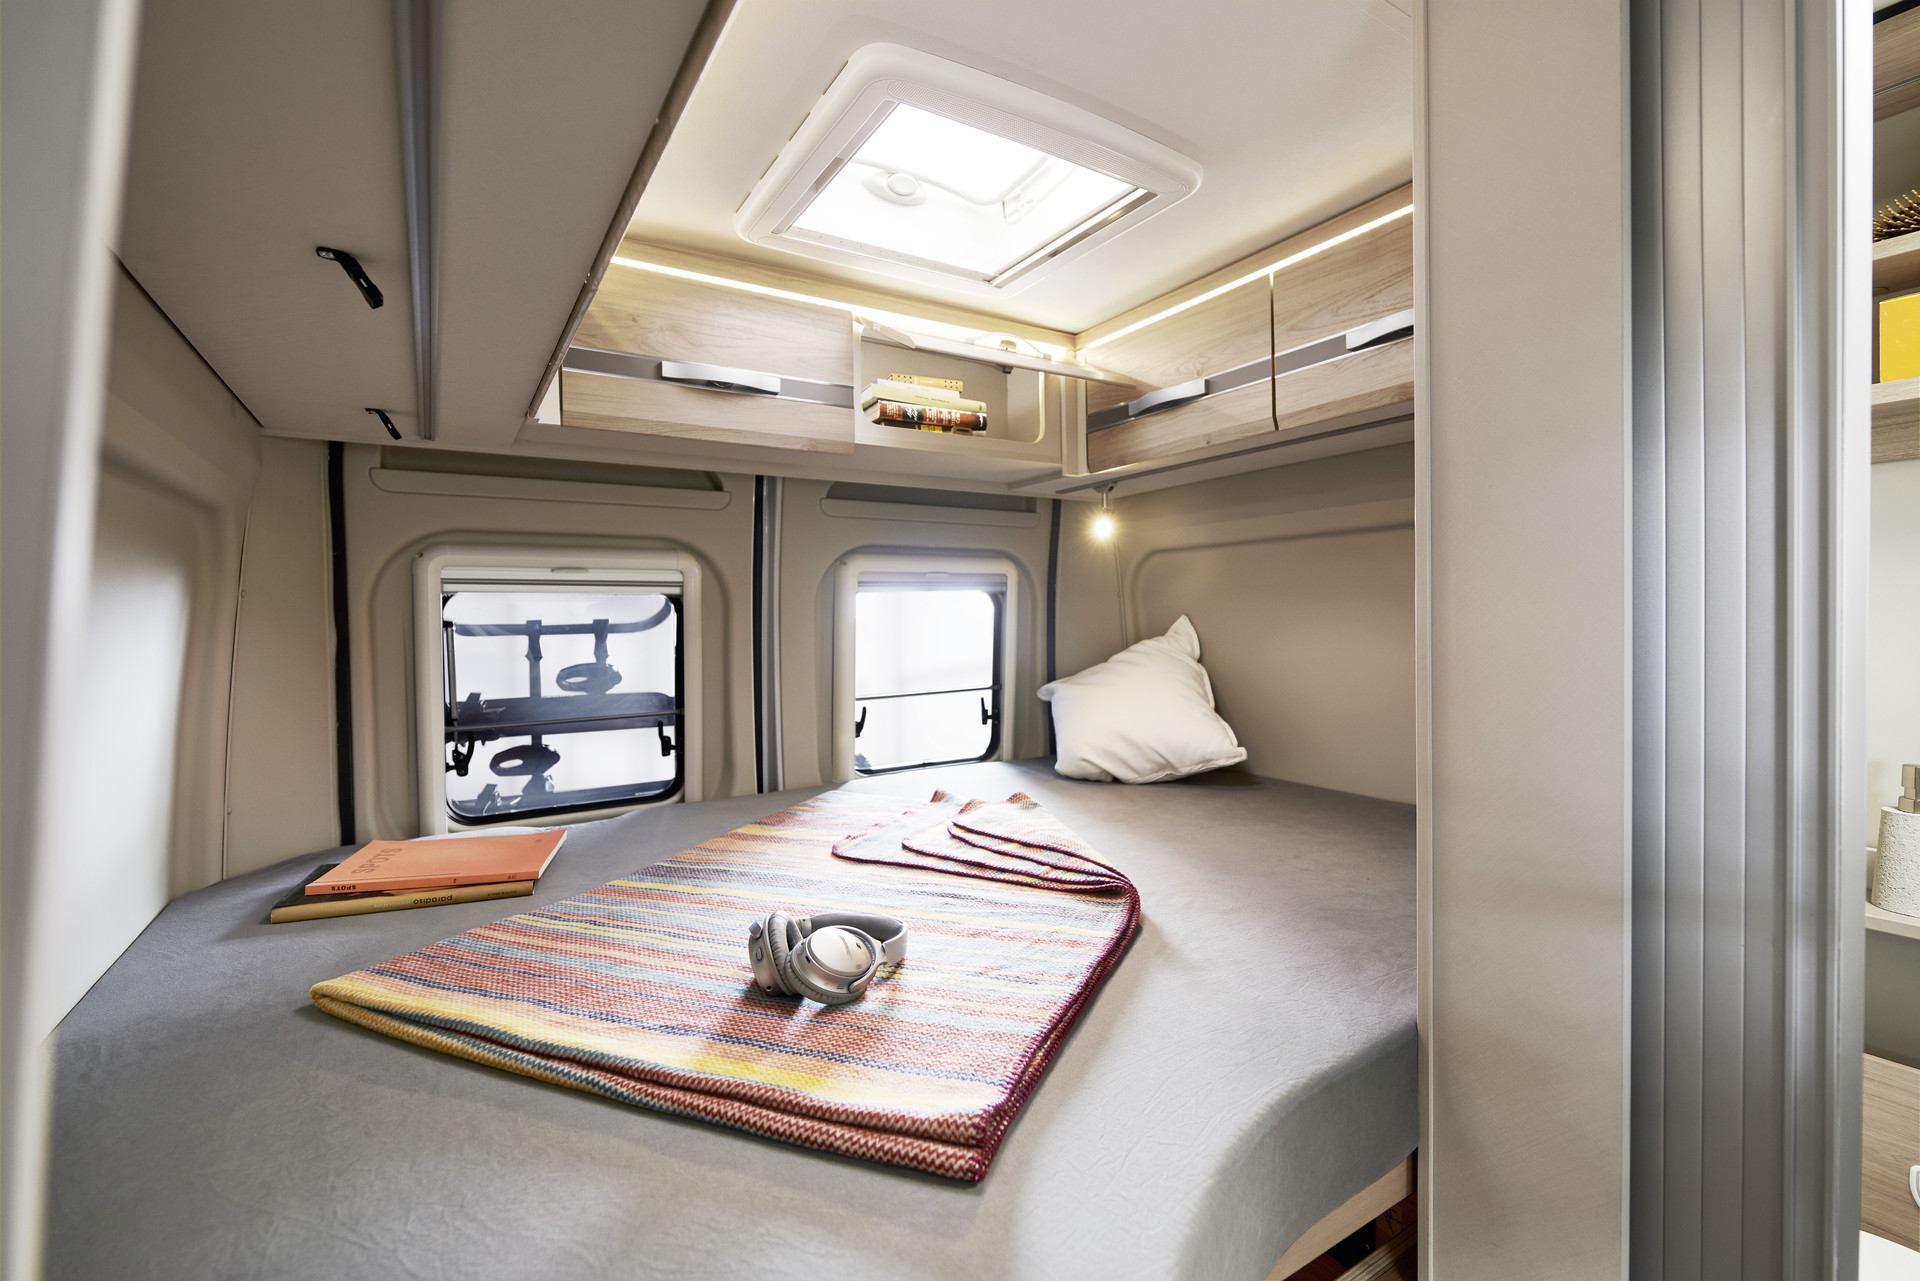 Double bed and lounger in one. Of course with a foldable bed frame. The indirect lighting from the overhead lockers creates a pleasant ambiance.